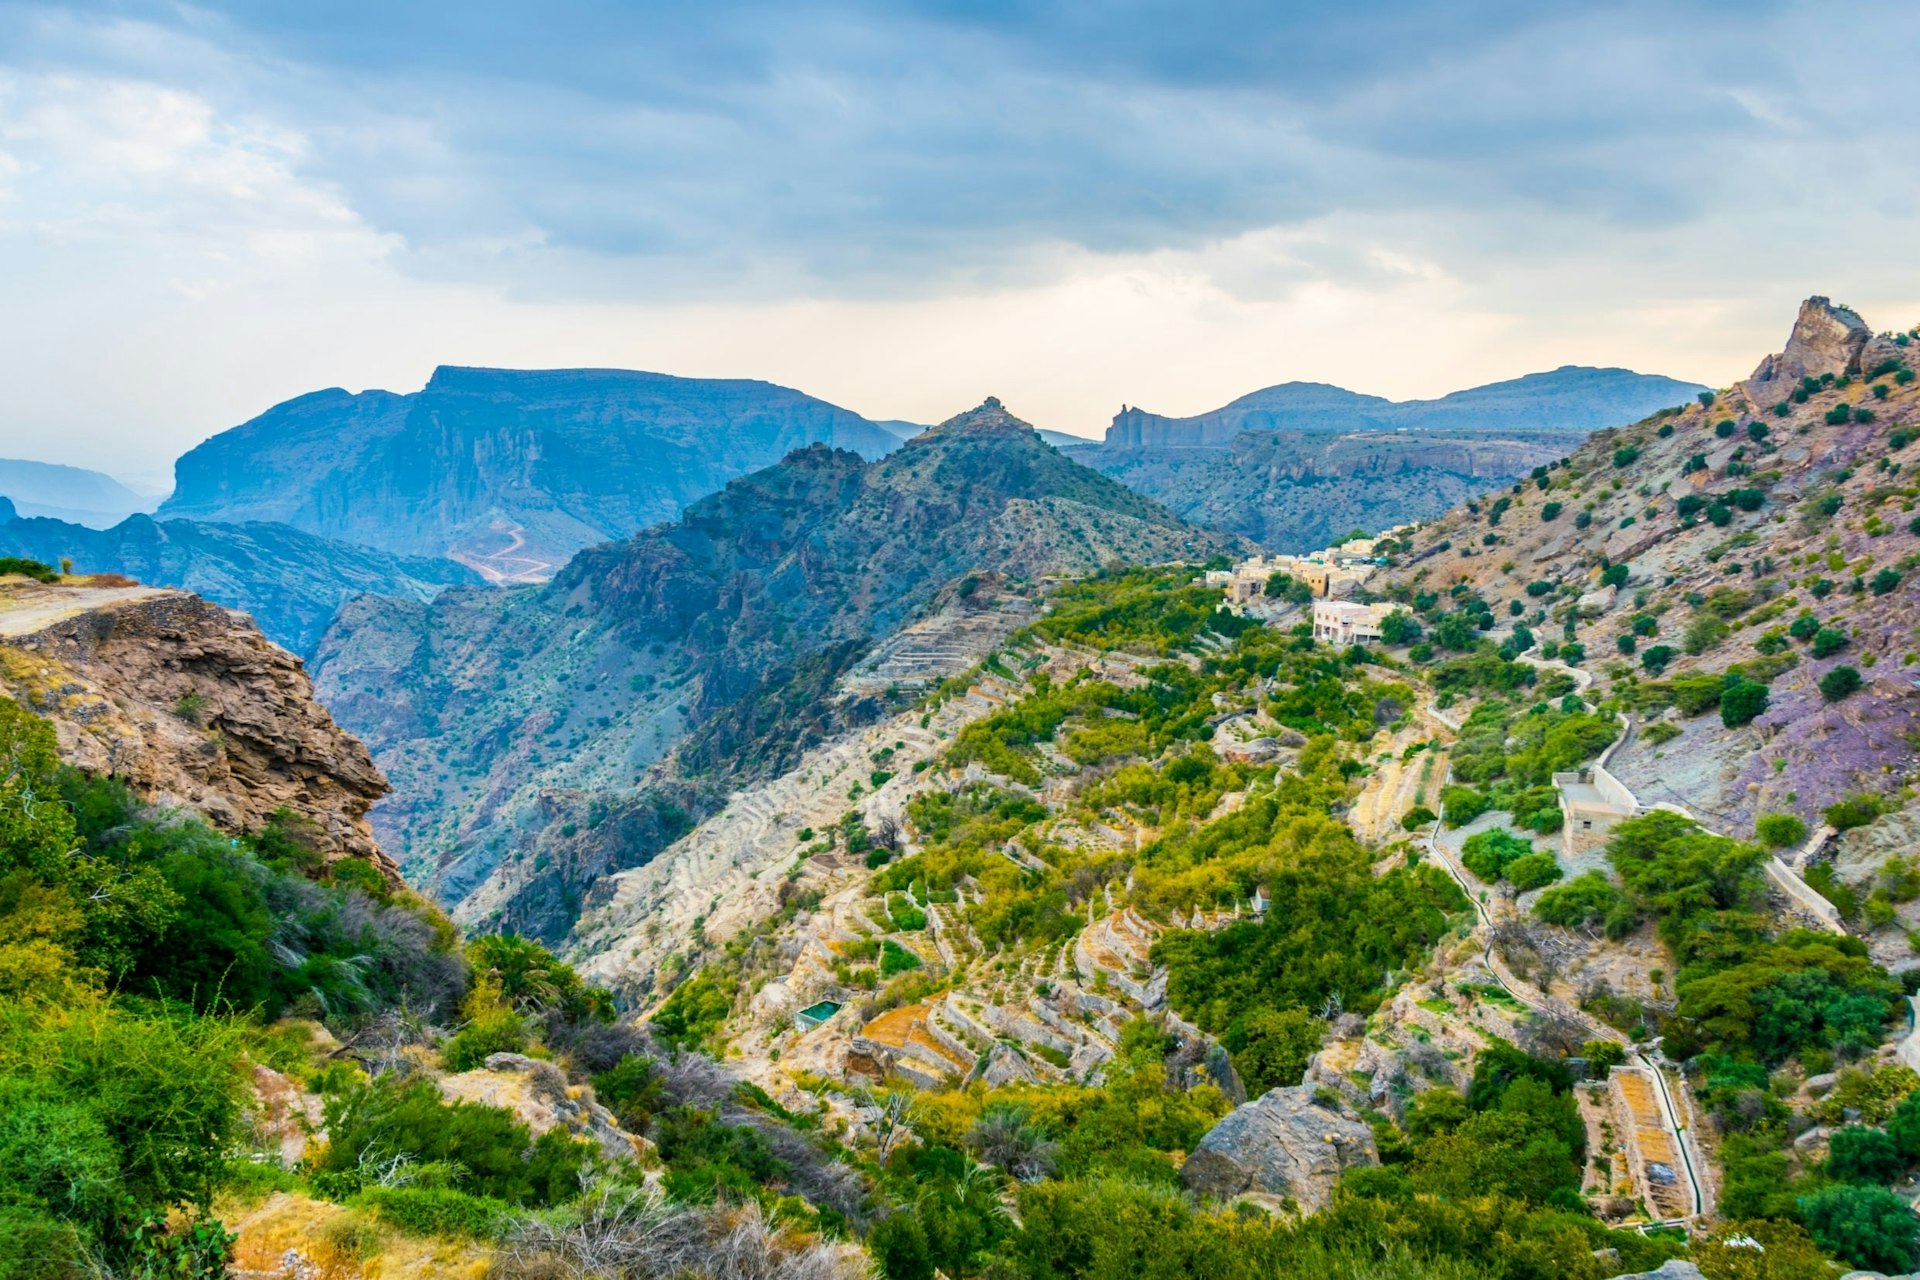 A view of the small rural villages and verdant scenery of the Saiq Plateau at Jebel Akhdar in Oman